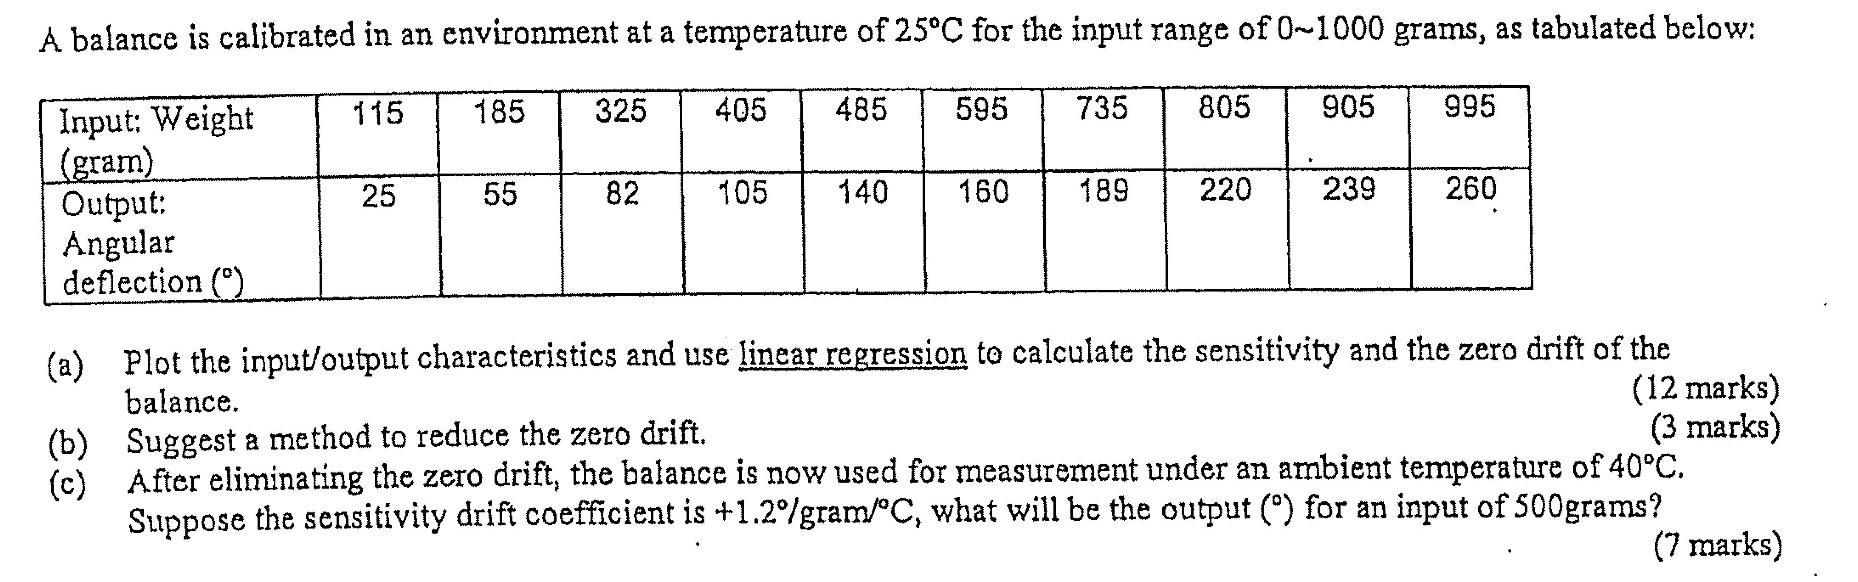 A balance is calibrated in an environment at a temperature of 25C for the input range of 0-1000 grams, as